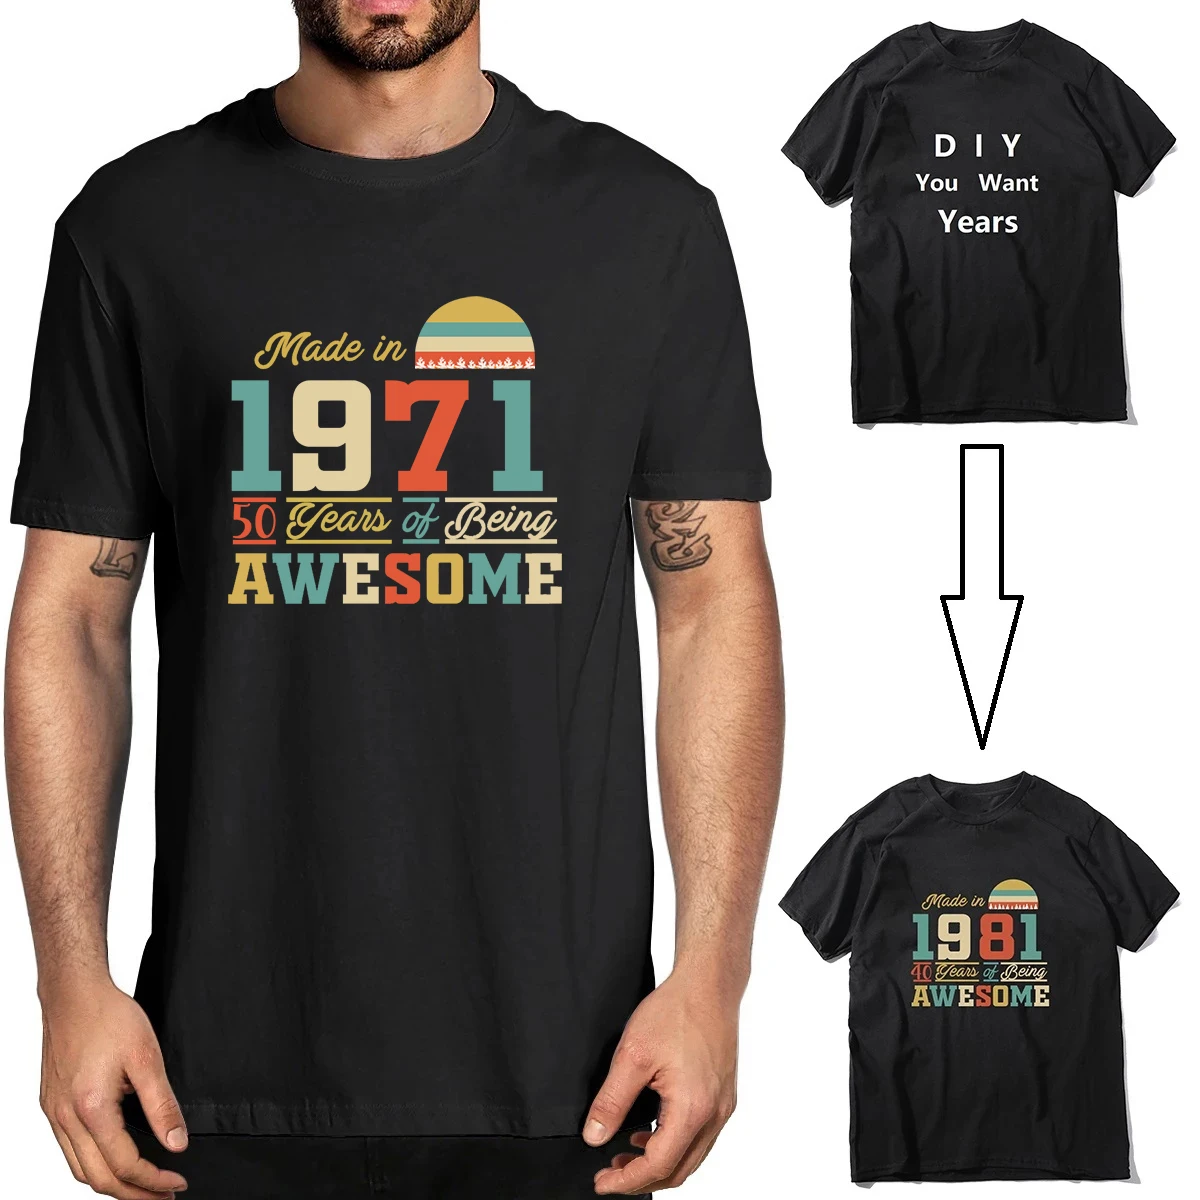 

Unisex 1971 Shirts 50 Years of Being Awesome 50th Birthday Vintage Men's Funny 100% Cotton Short Sleeve T-Shirt Women Top Tee